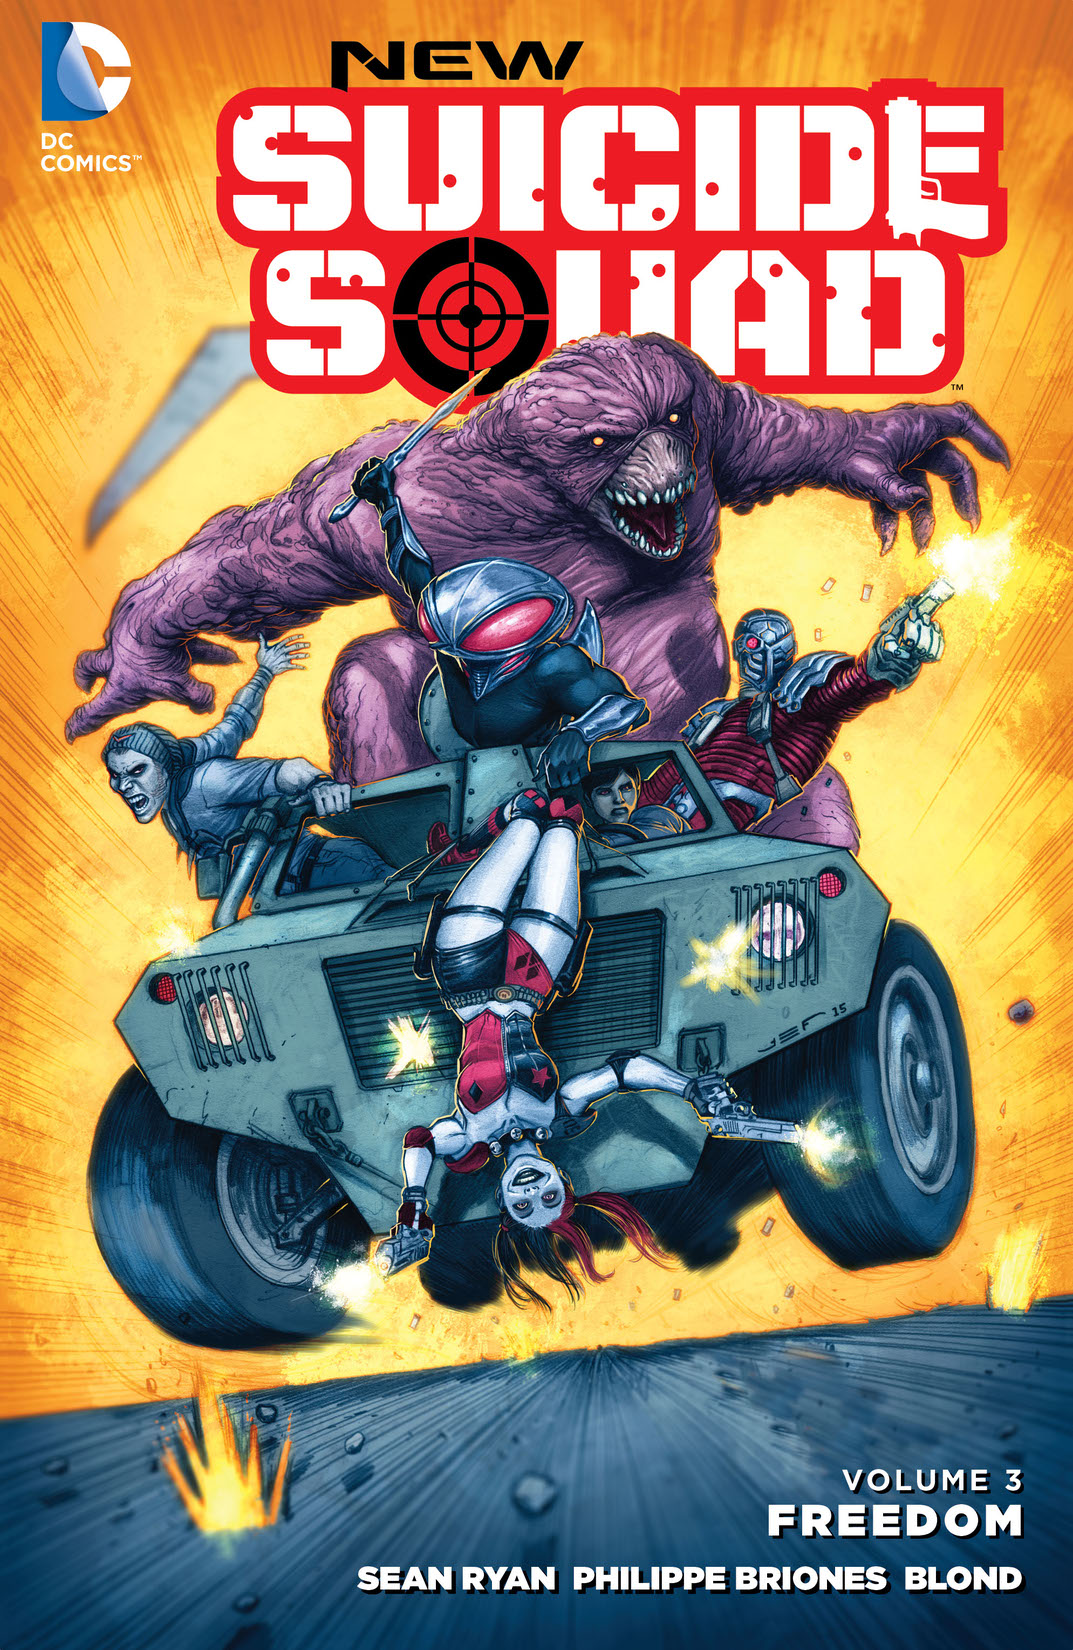 New Suicide Squad Vol. 3: Freedom preview images